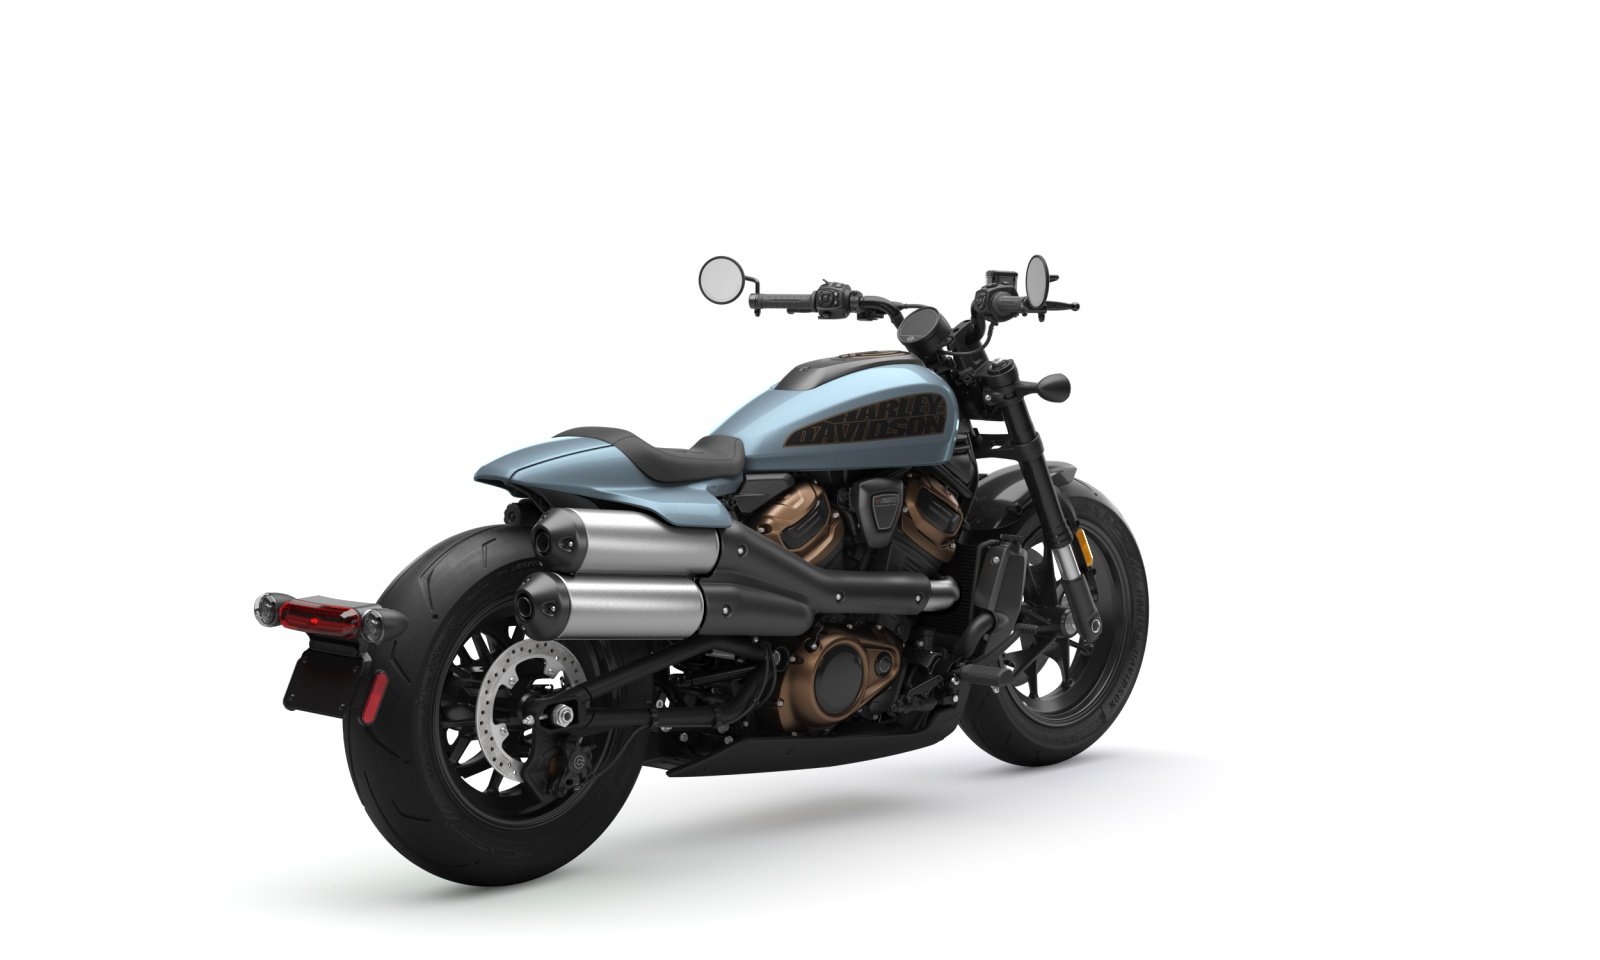 Harley-Davidson P-Type Is the New Sportster in Mean Black and Yellow  Clothing - autoevolution